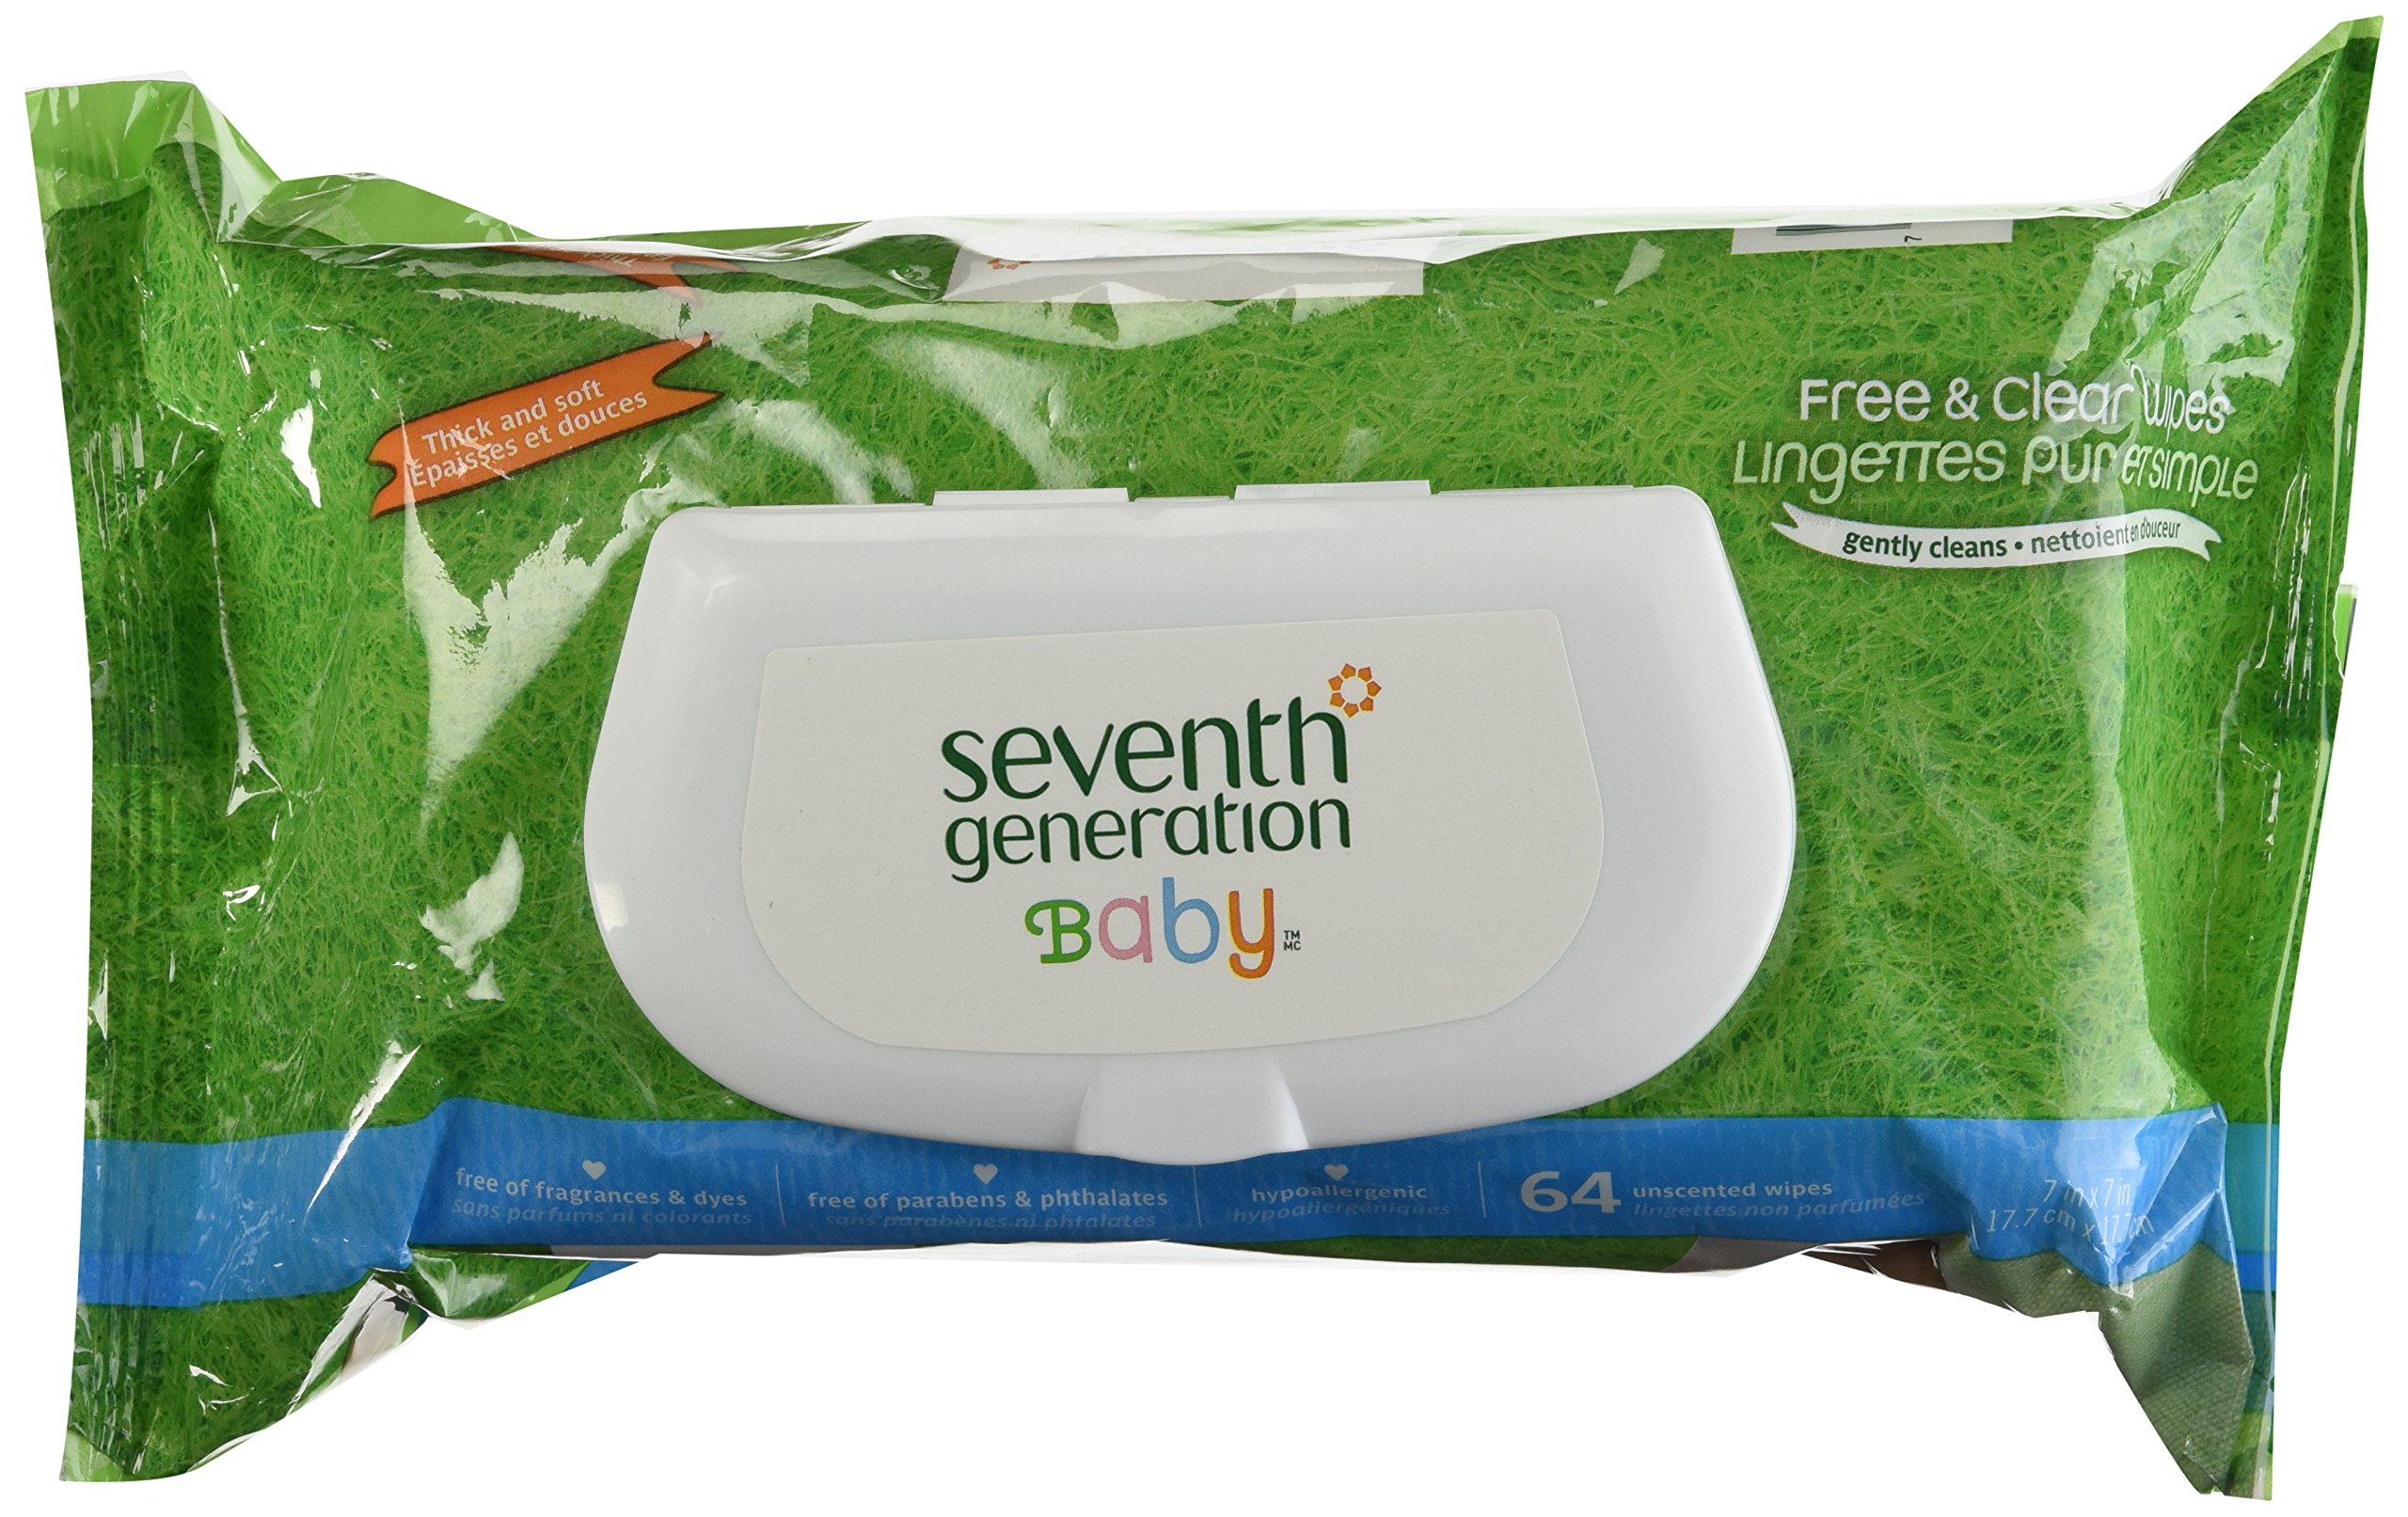 Seventh Generation Free and Clear Wipes Unscented - 64 Wipes $3.01 at Amazon